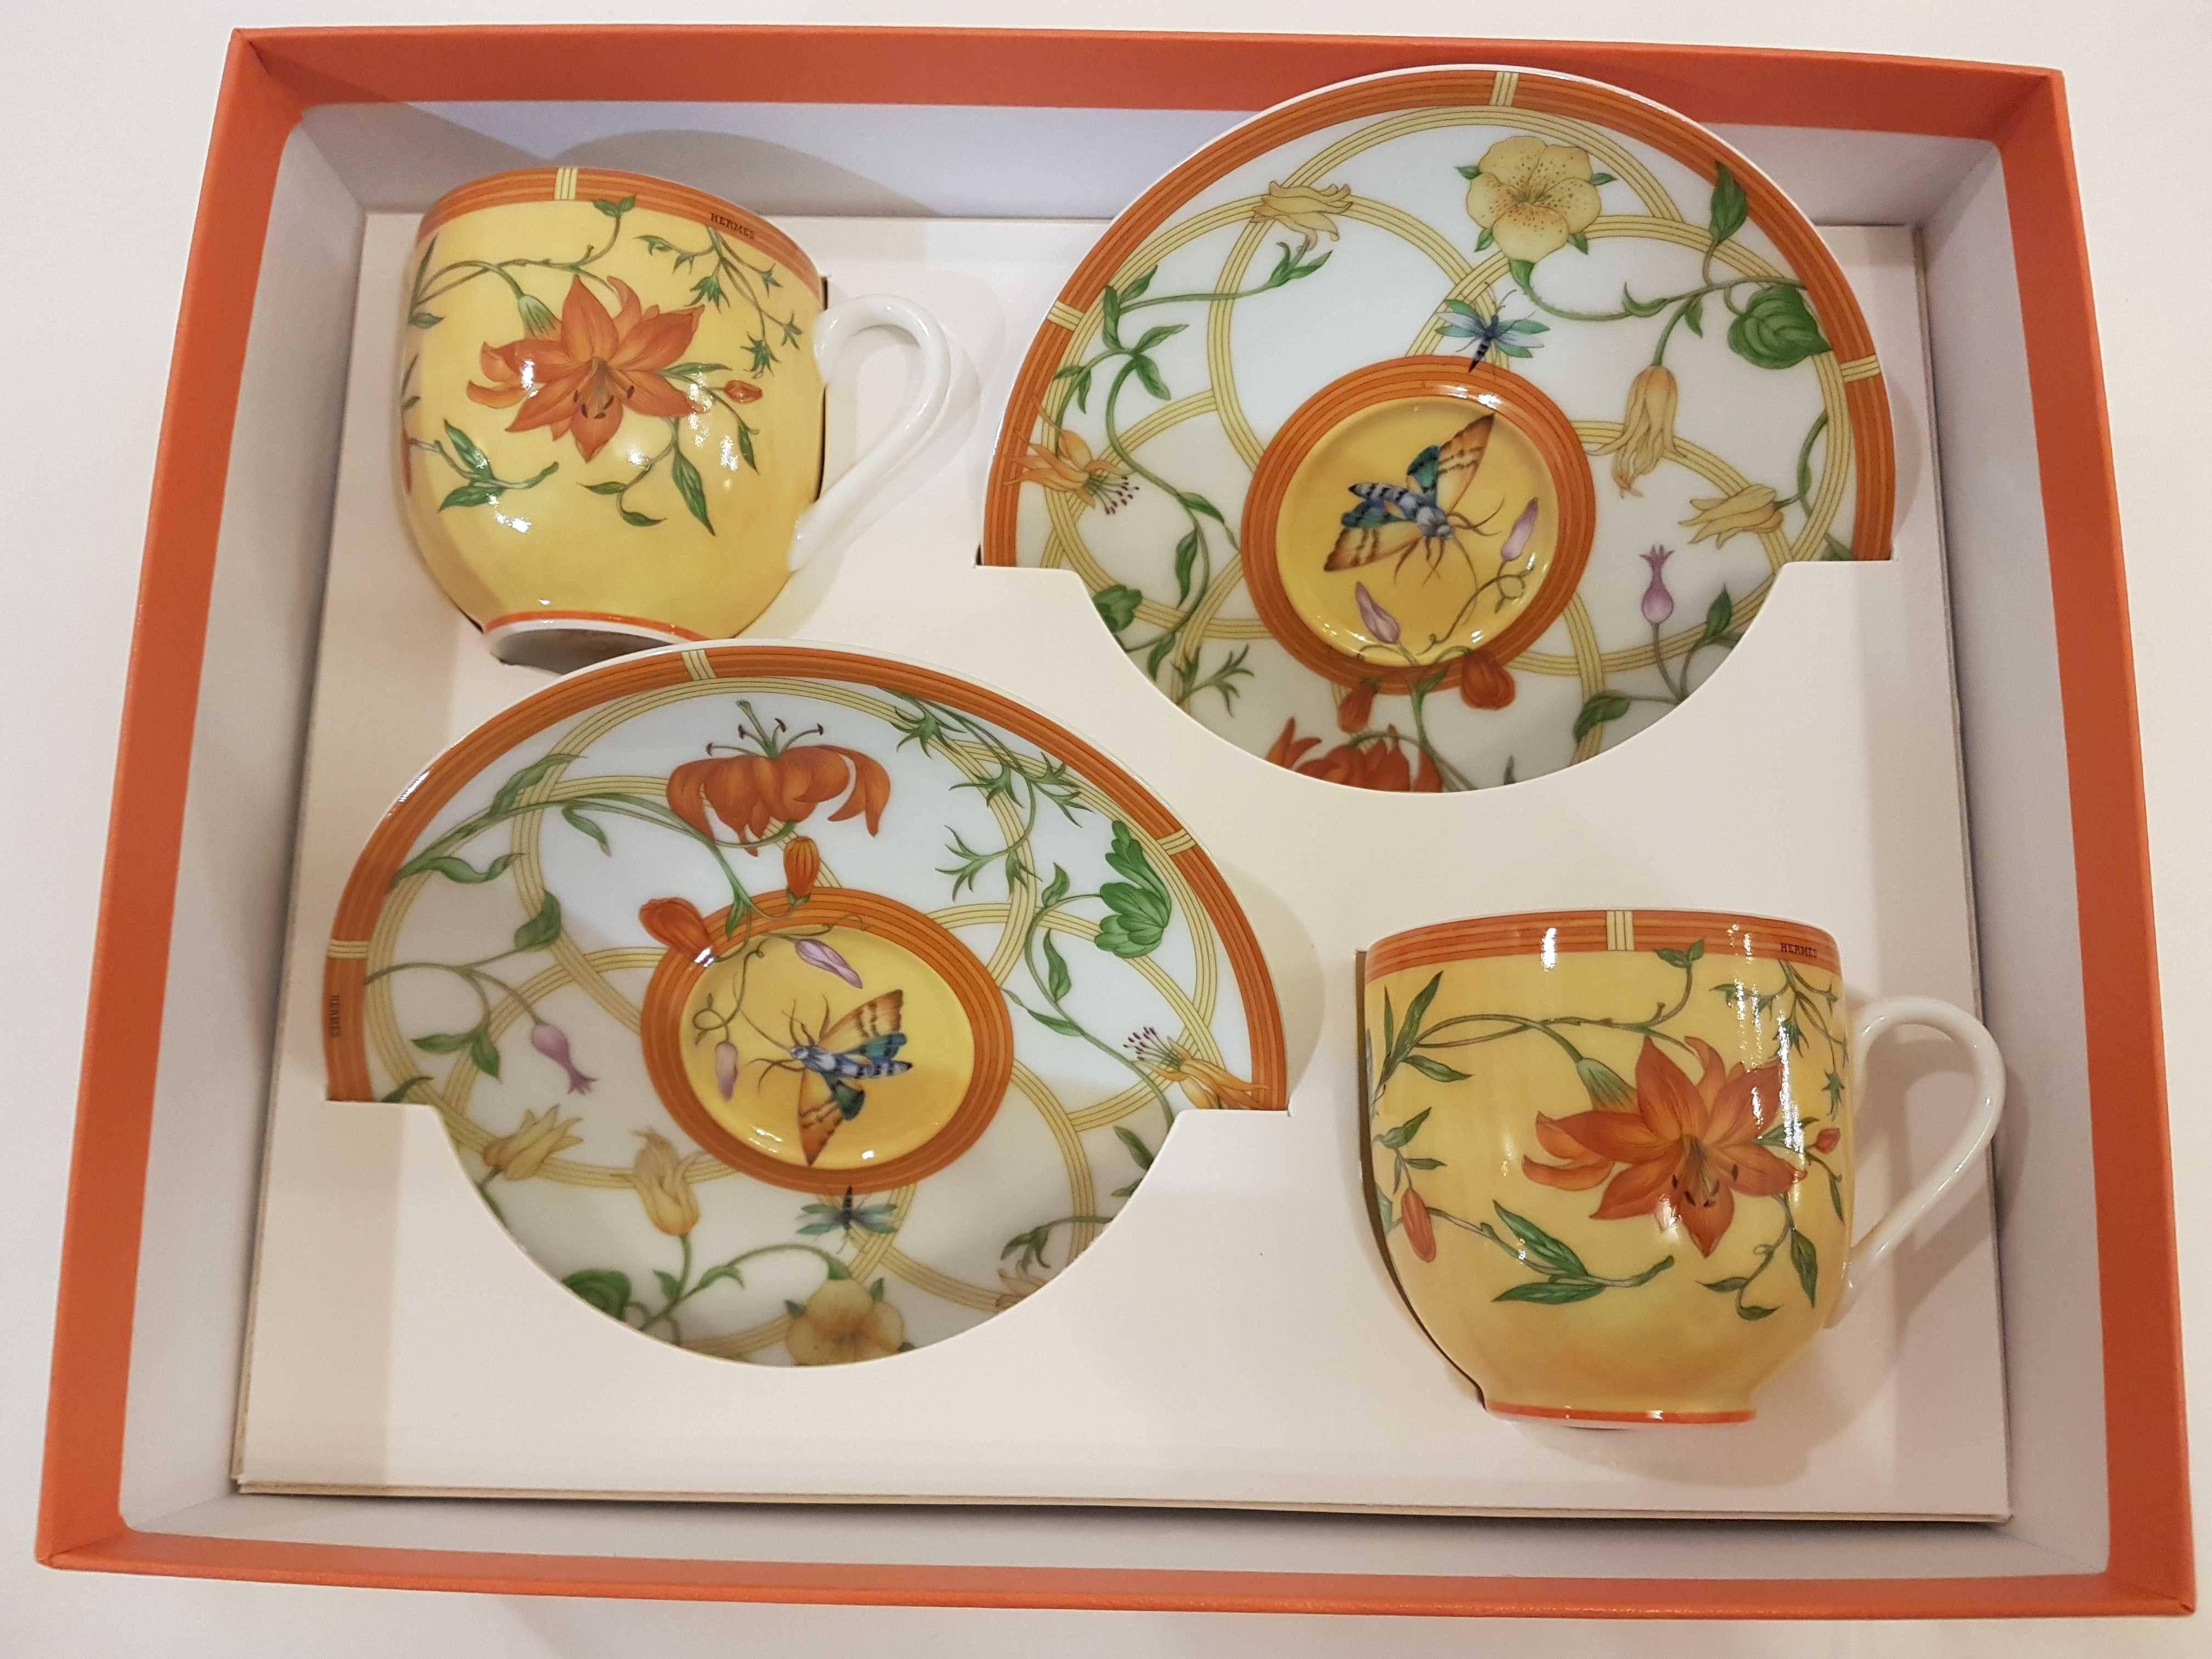 A set of two coffee cups and saucers in polycrome porcelain of Hermes.
Pattern Siesta decorated with a motif of flowers, fruits and butterflies.
This pattern is discontinued today.
In is original Hèrmes orange paper box